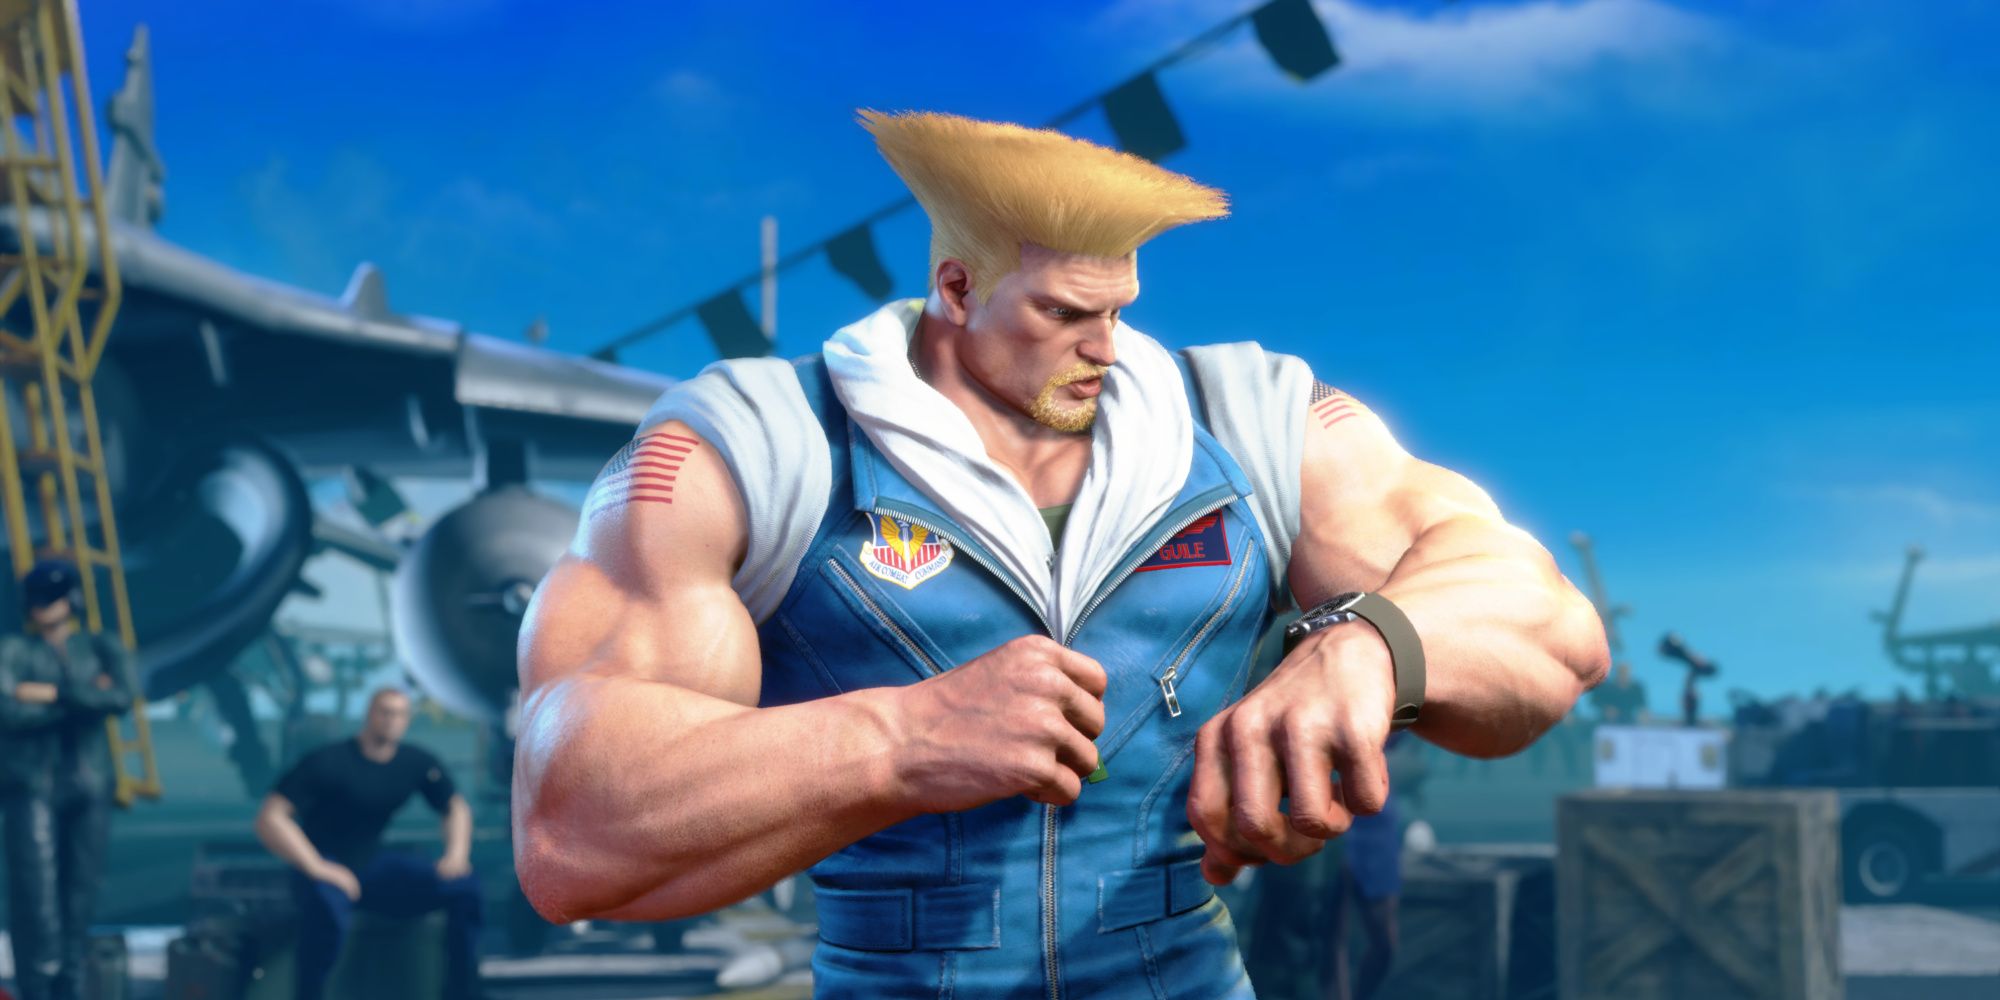 Guile in Street Fighter 6